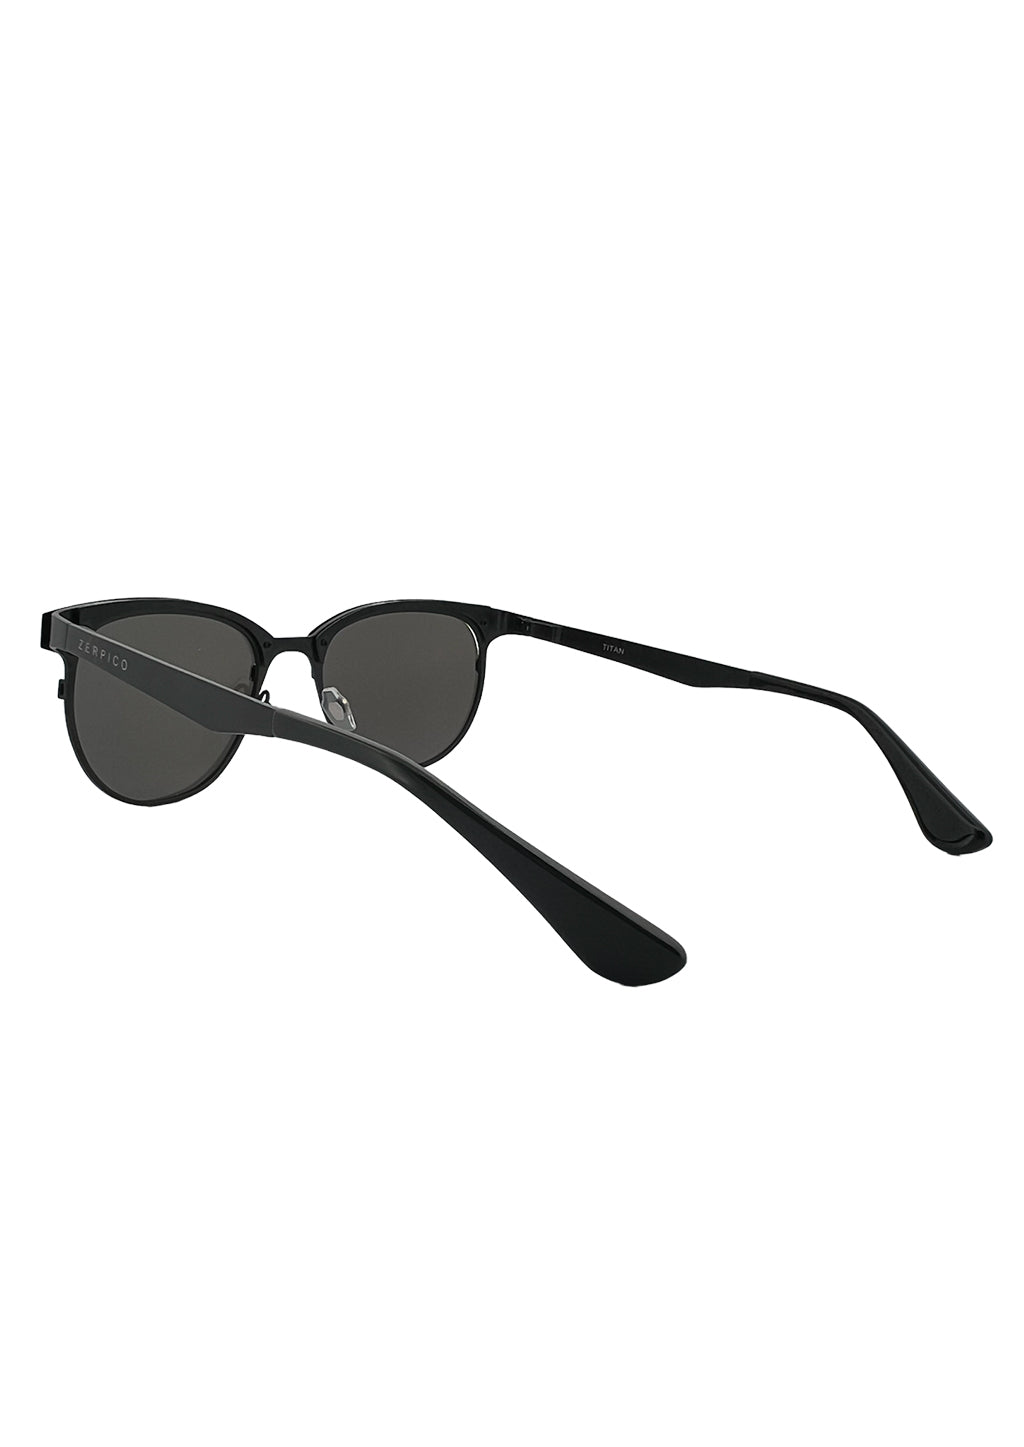 Sunglasses Ray-Ban Clubmaster Oversized RB 4175 (877/M3) RB4175 Unisex |  Free Shipping Shop Online